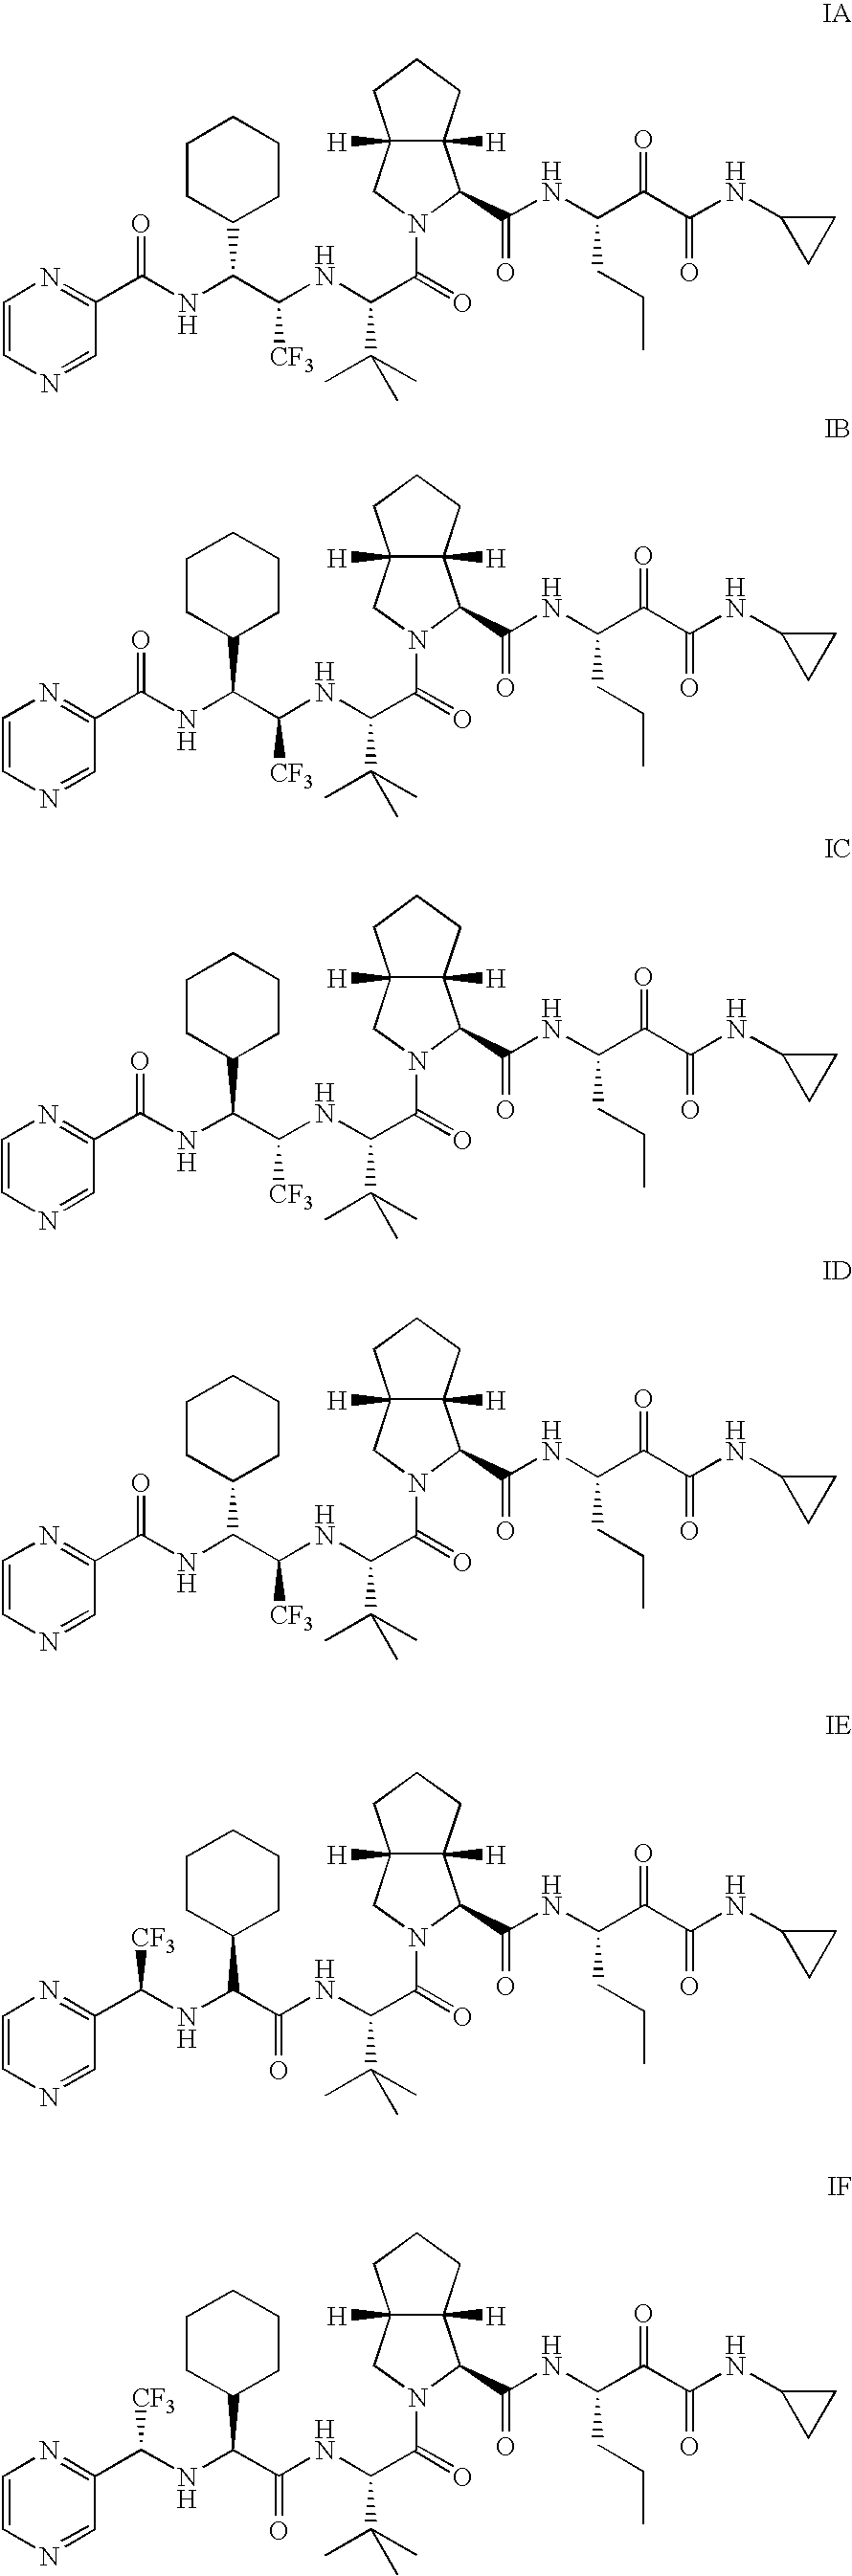 Substituted pyrazines that inhibit protease cathepsin S and HCV replication